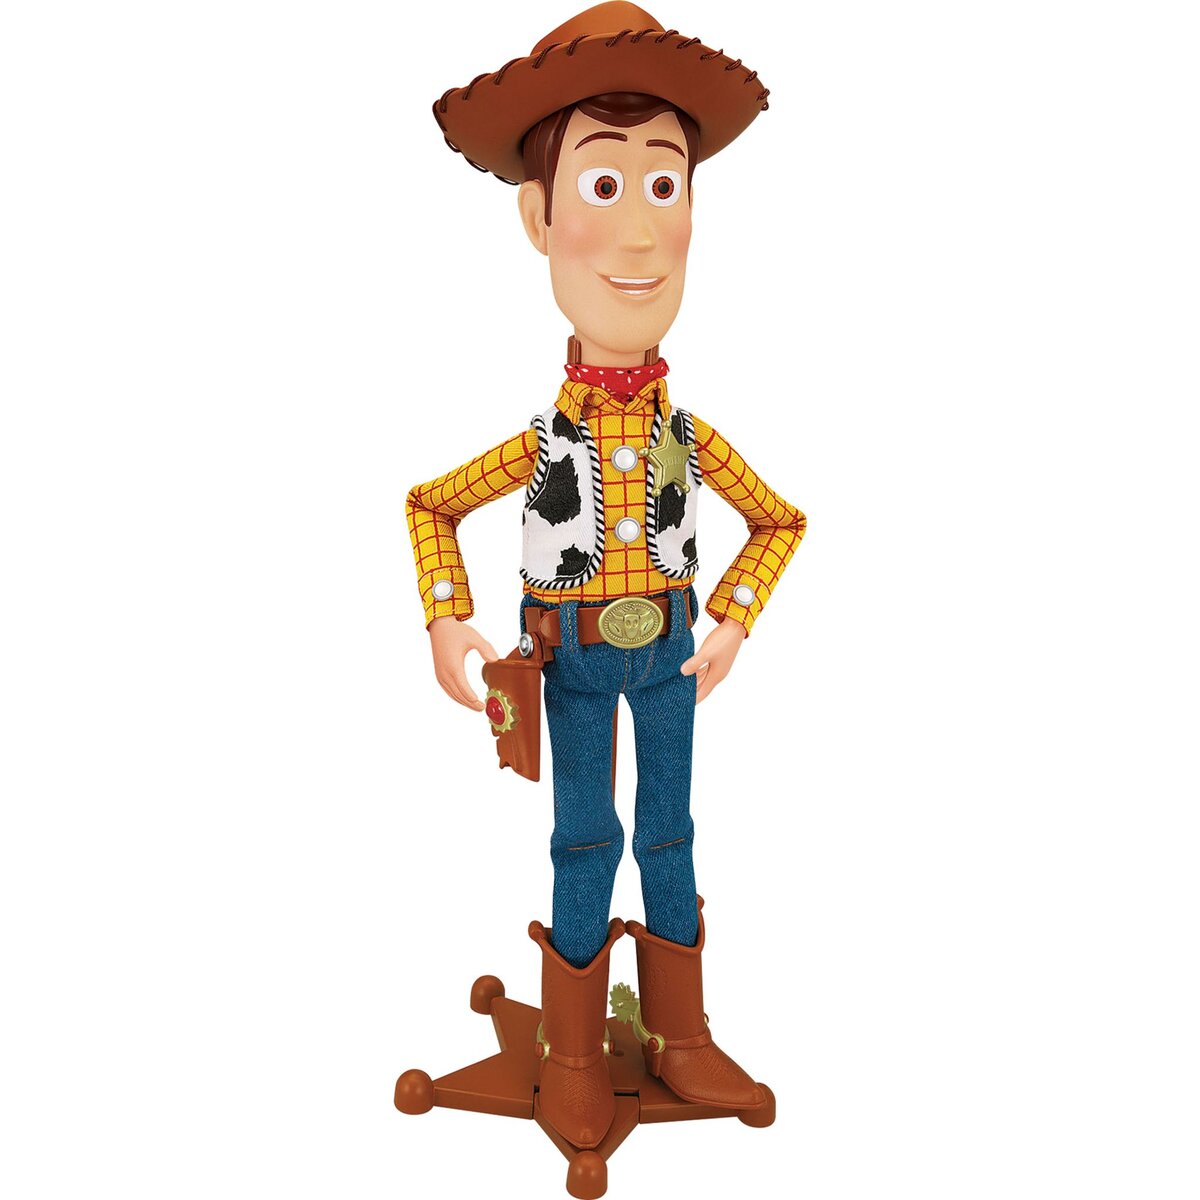 LANSAY Figurine électronique Toy Story 4 - Sherif Woody Collection Signature